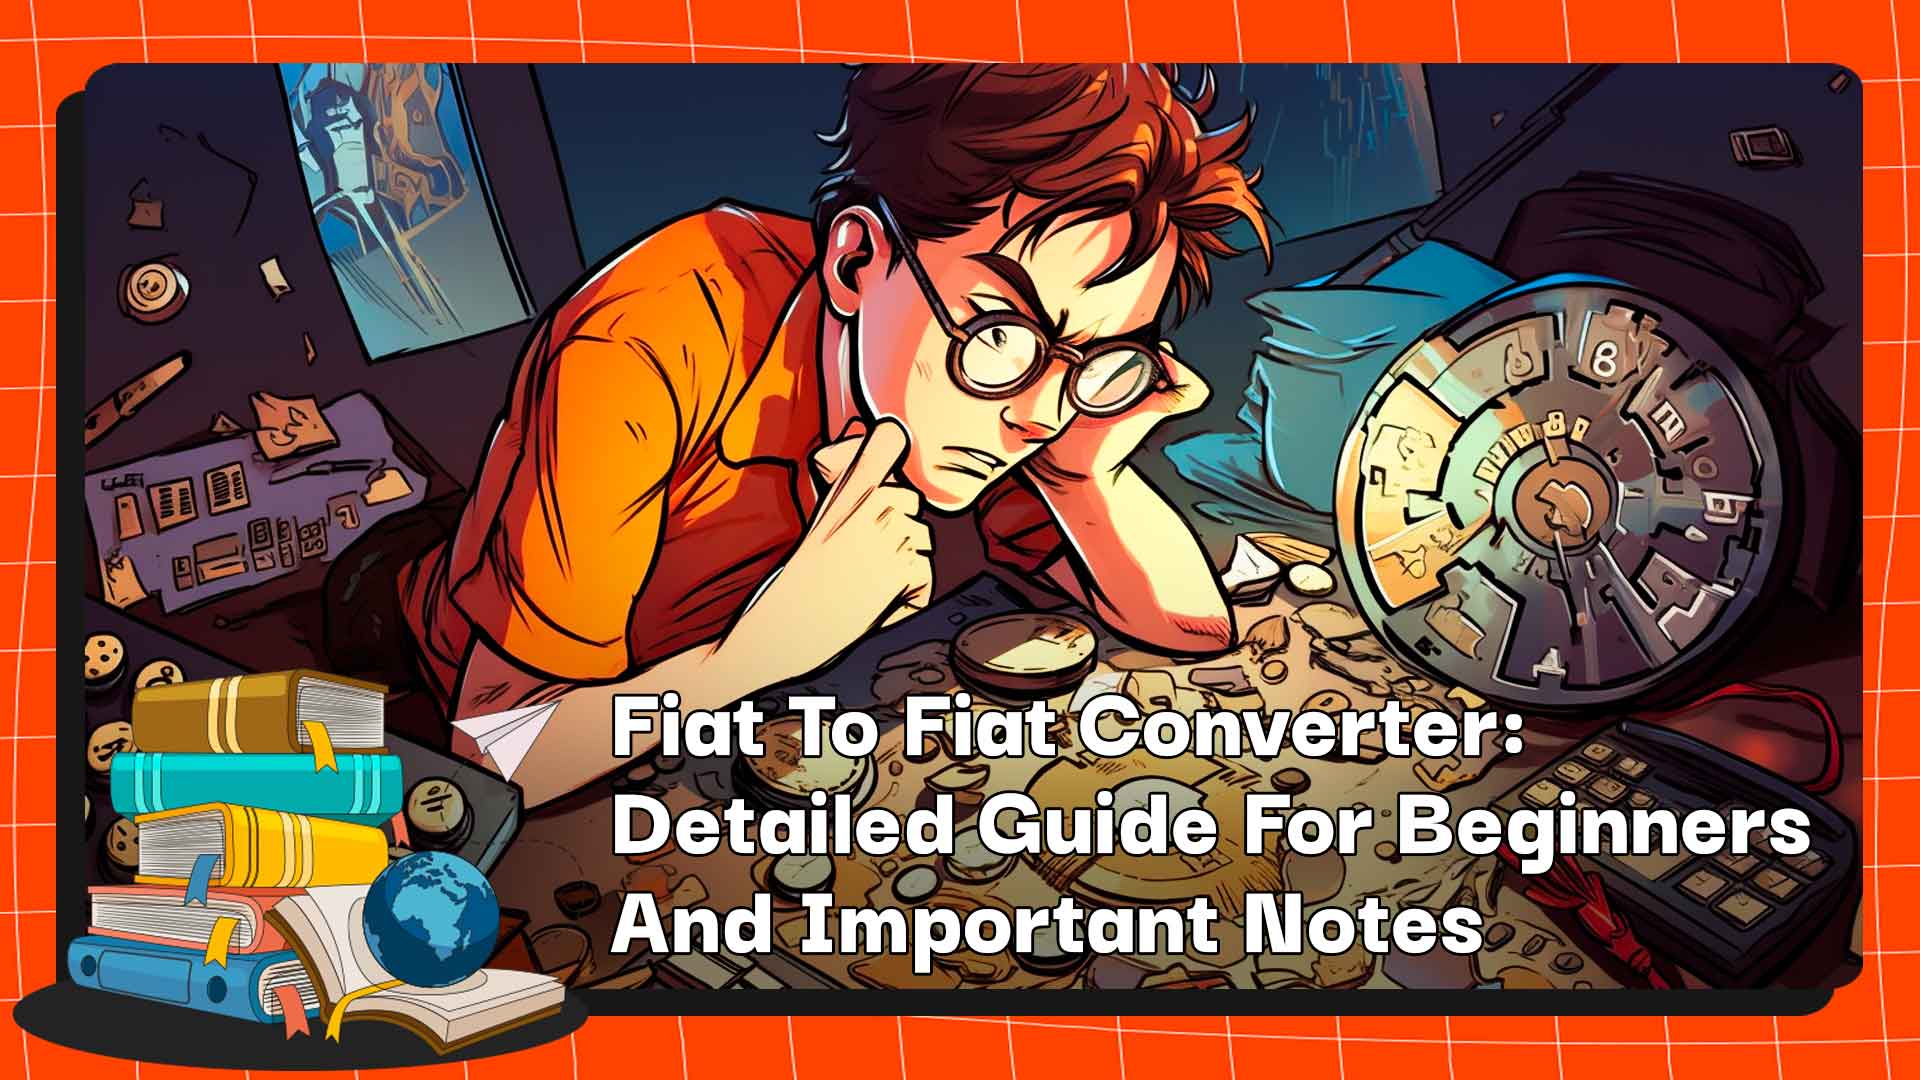 Fiat To Fiat Converter: Detailed Guide For Beginners And Important Notes